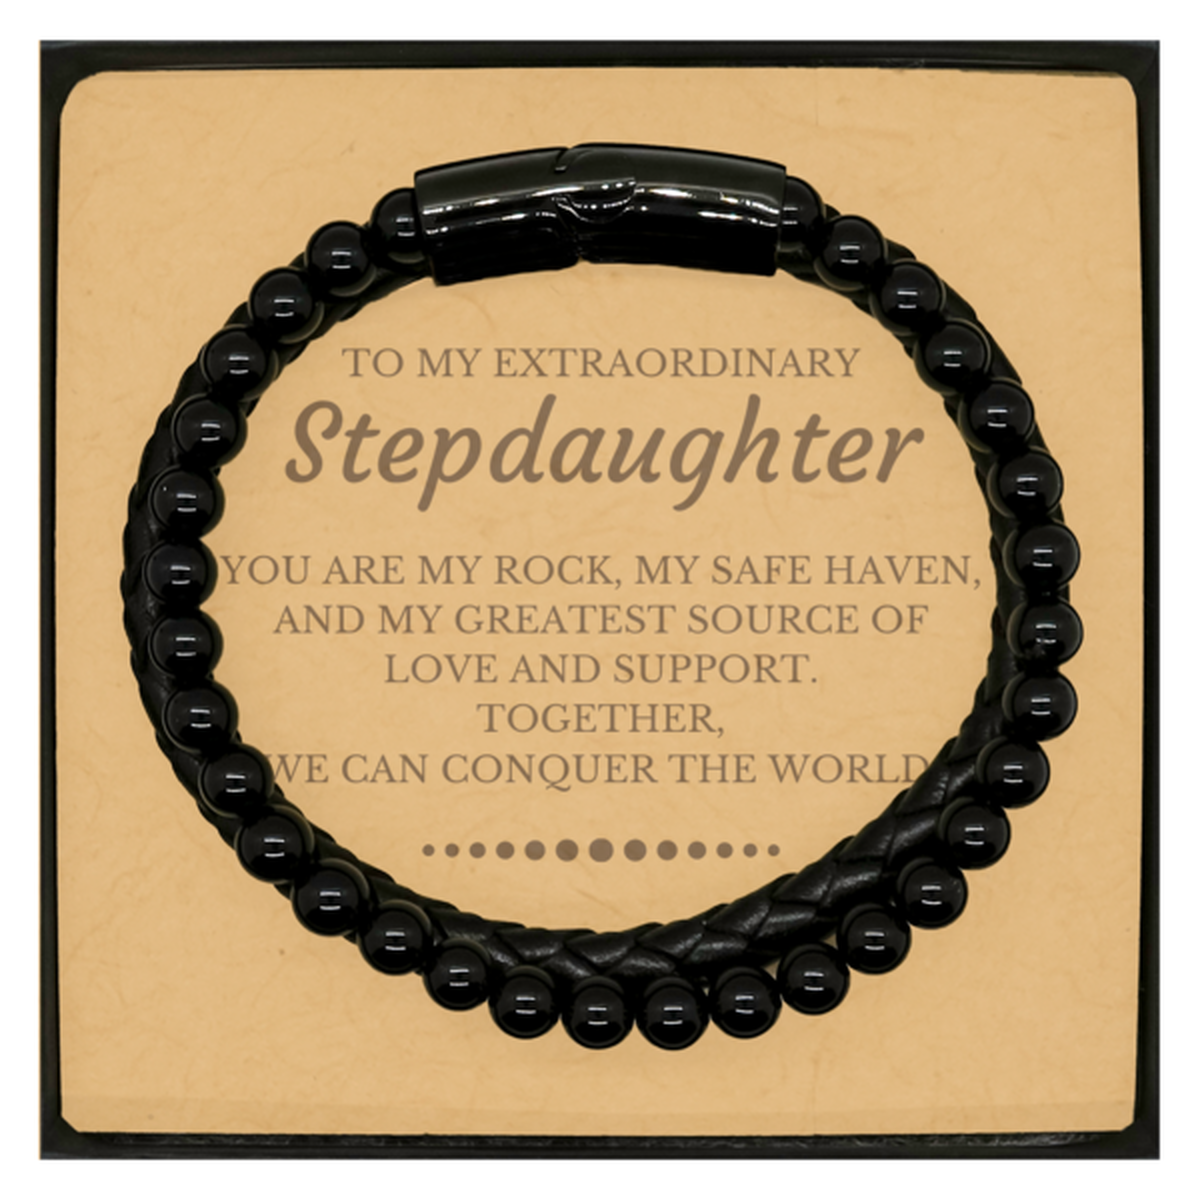 To My Extraordinary Stepdaughter Gifts, Together, we can conquer the world, Birthday Christmas Stone Leather Bracelets For Stepdaughter, Christmas Gifts For Stepdaughter